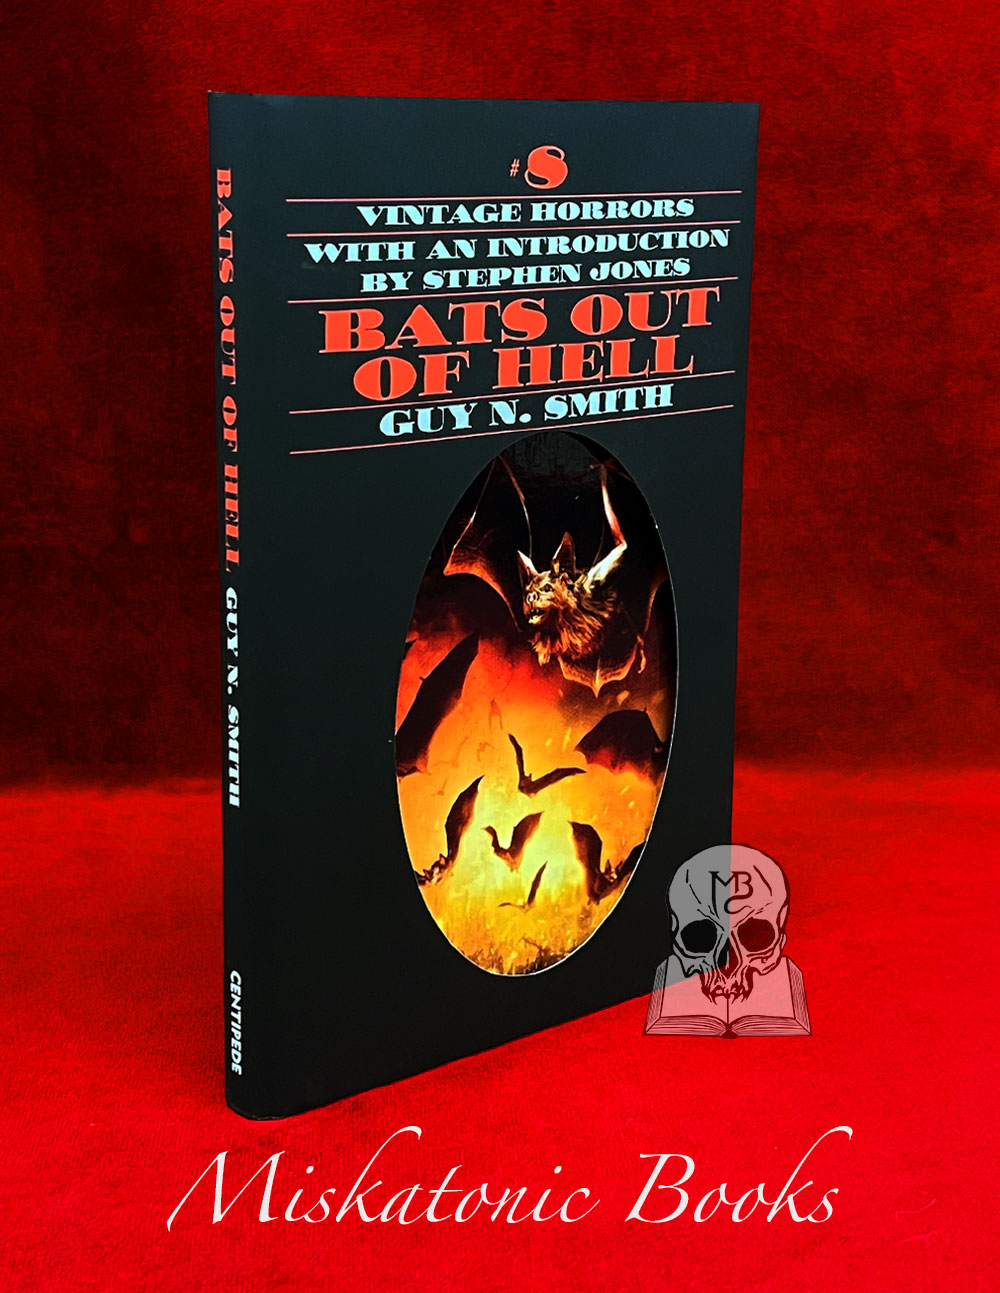 BATS OUT OF HELL by Guy N. Smith - Hardcover Edition